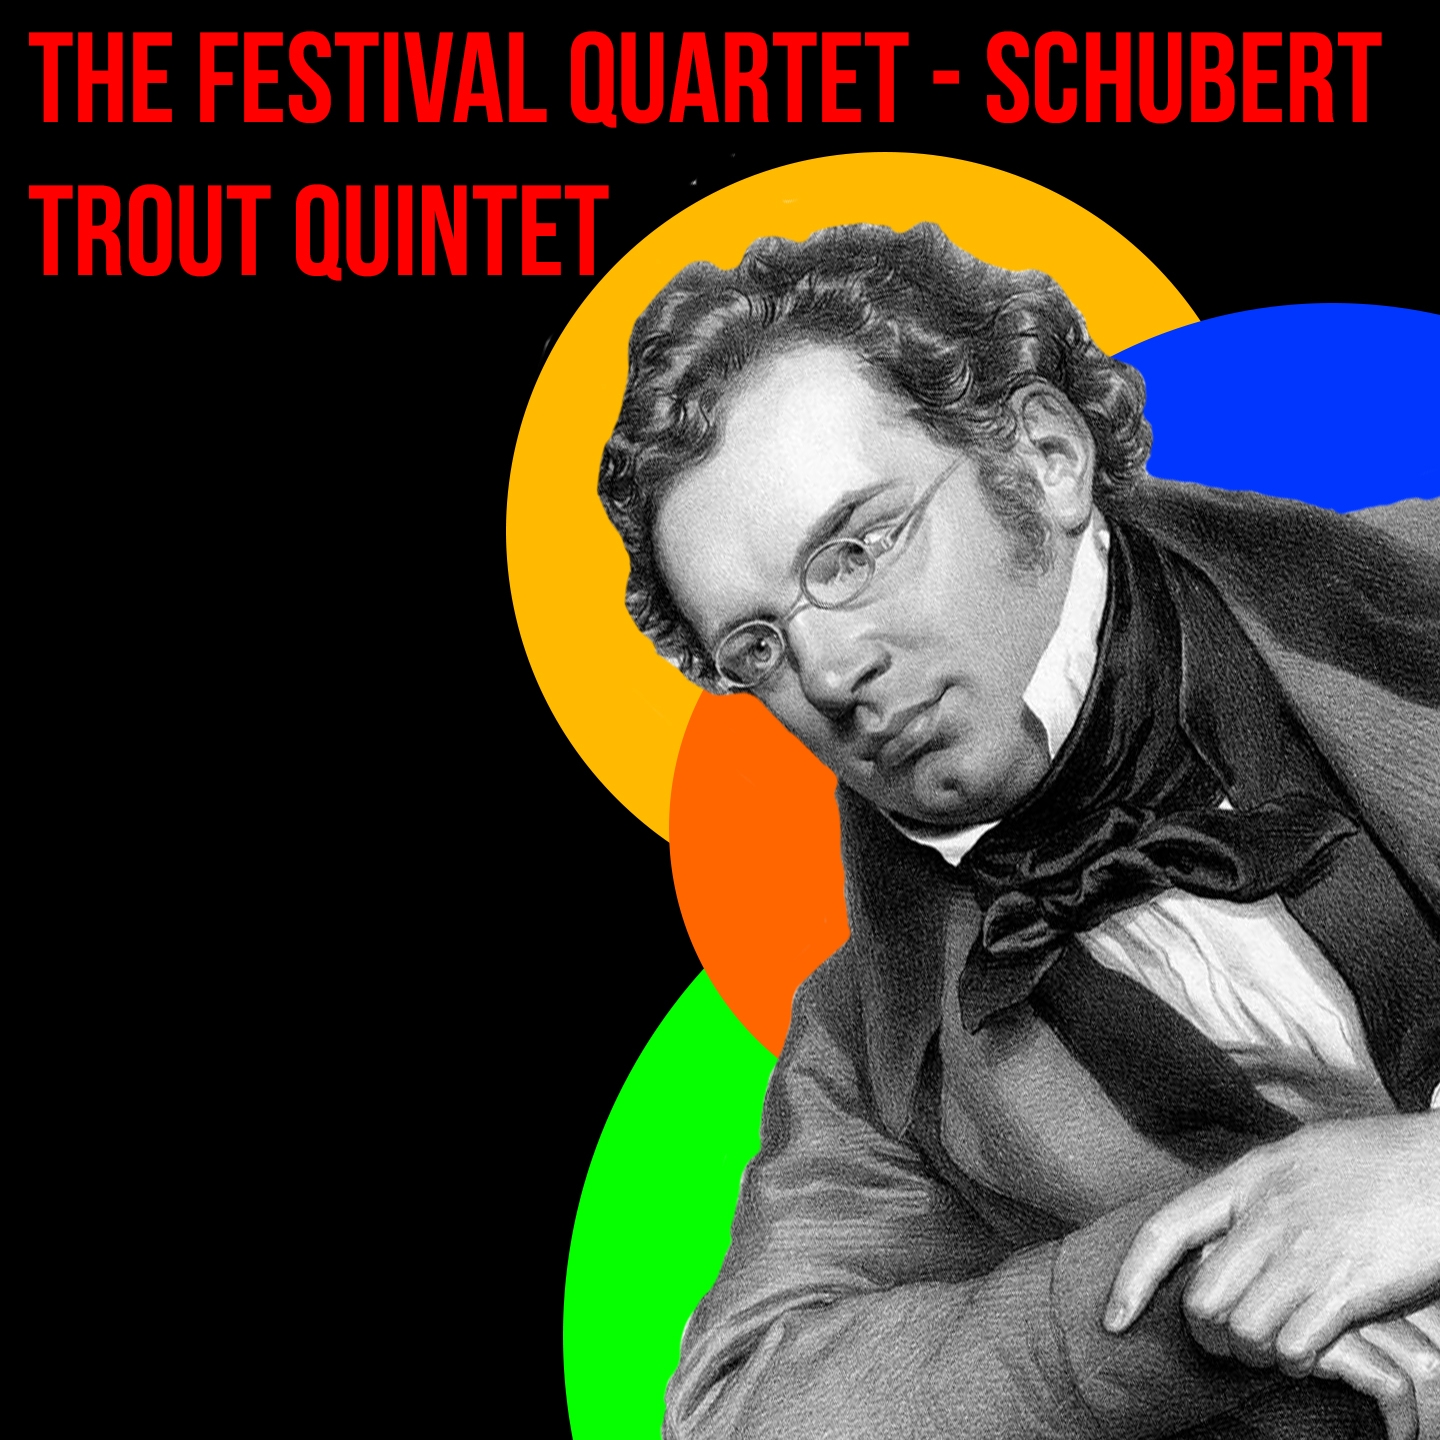 Piano Quintet in A Major, Op. 114, D. 667 "The Trout" / II. Andante